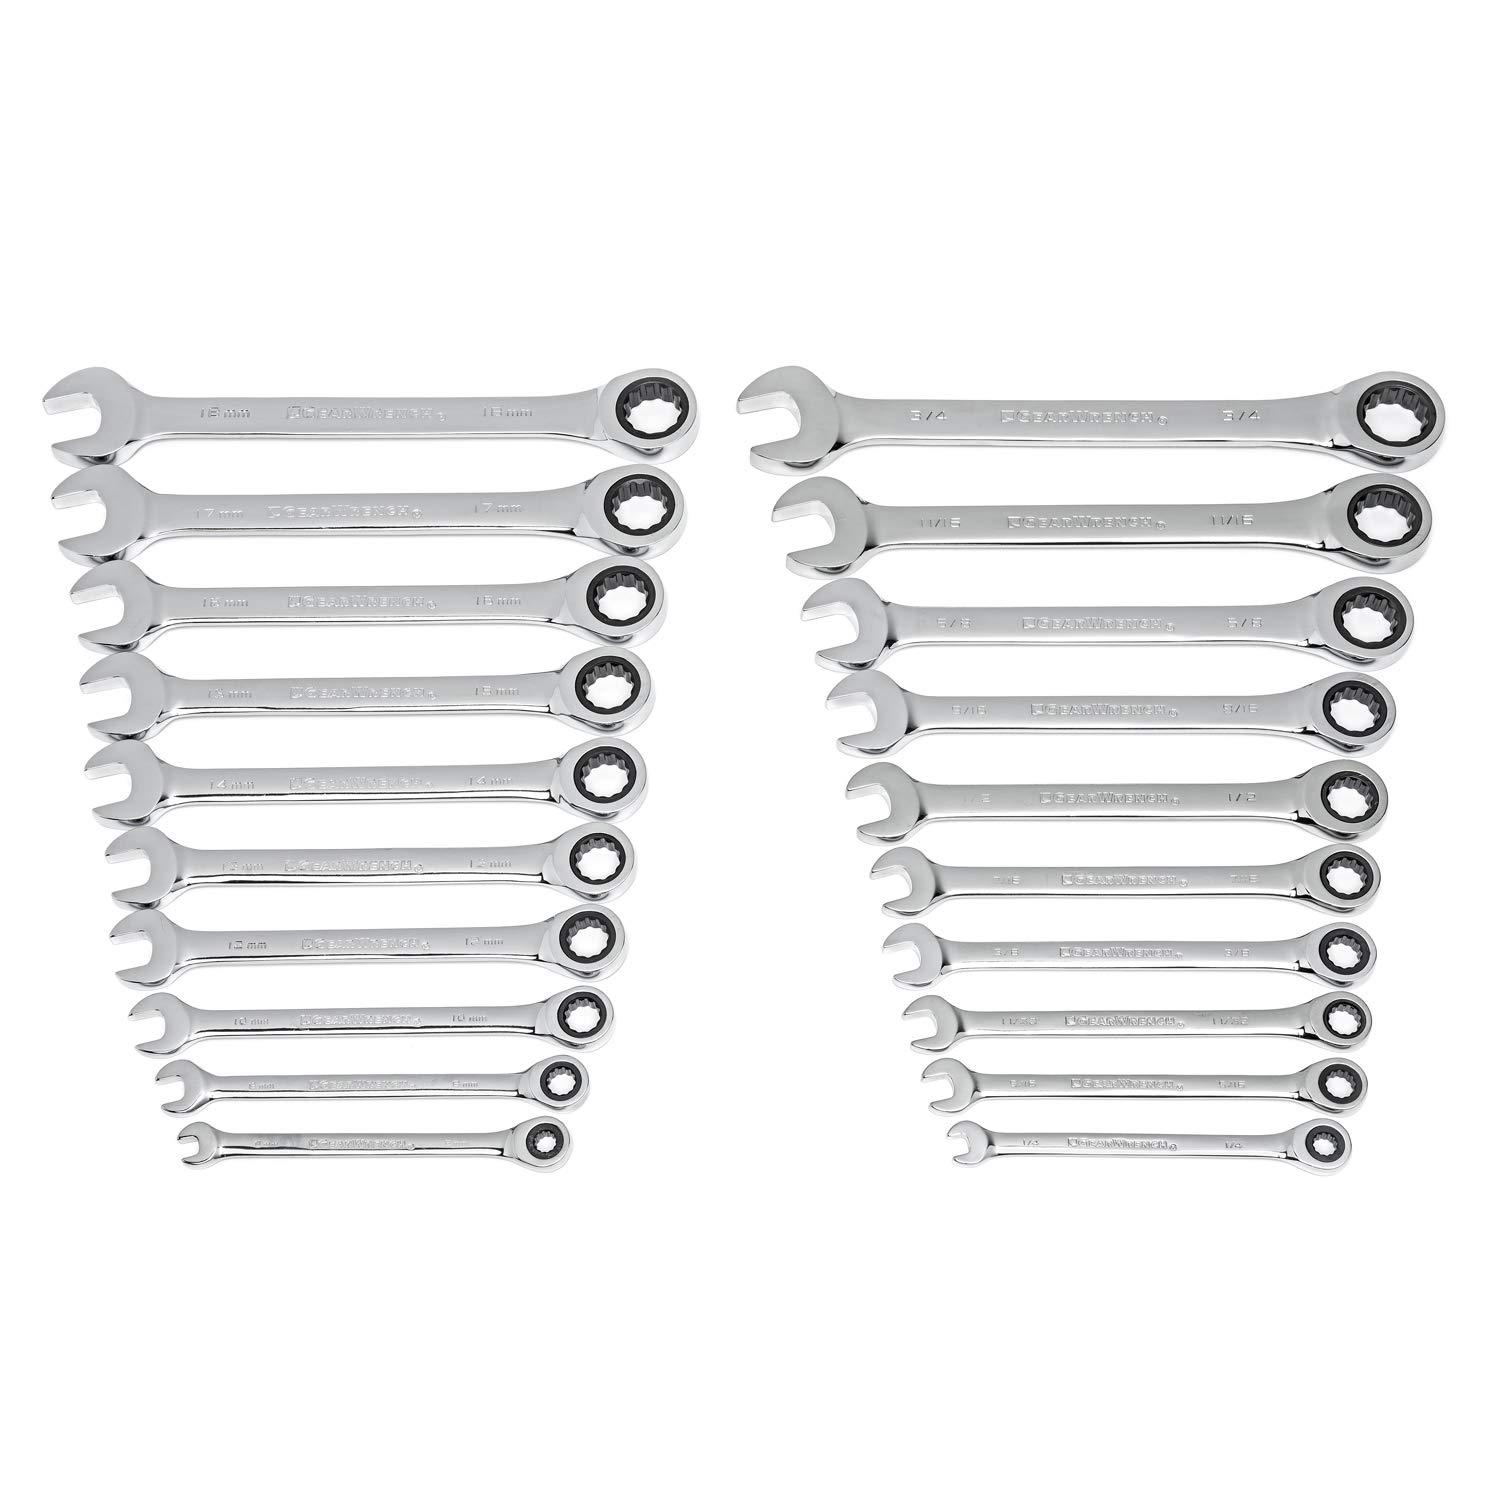 YMMV - Gearwrench SAE/Metric 72-Tooth Combination Ratcheting Wrench Tool Set (20-Piece) $39 Homedepot + FS $38.98